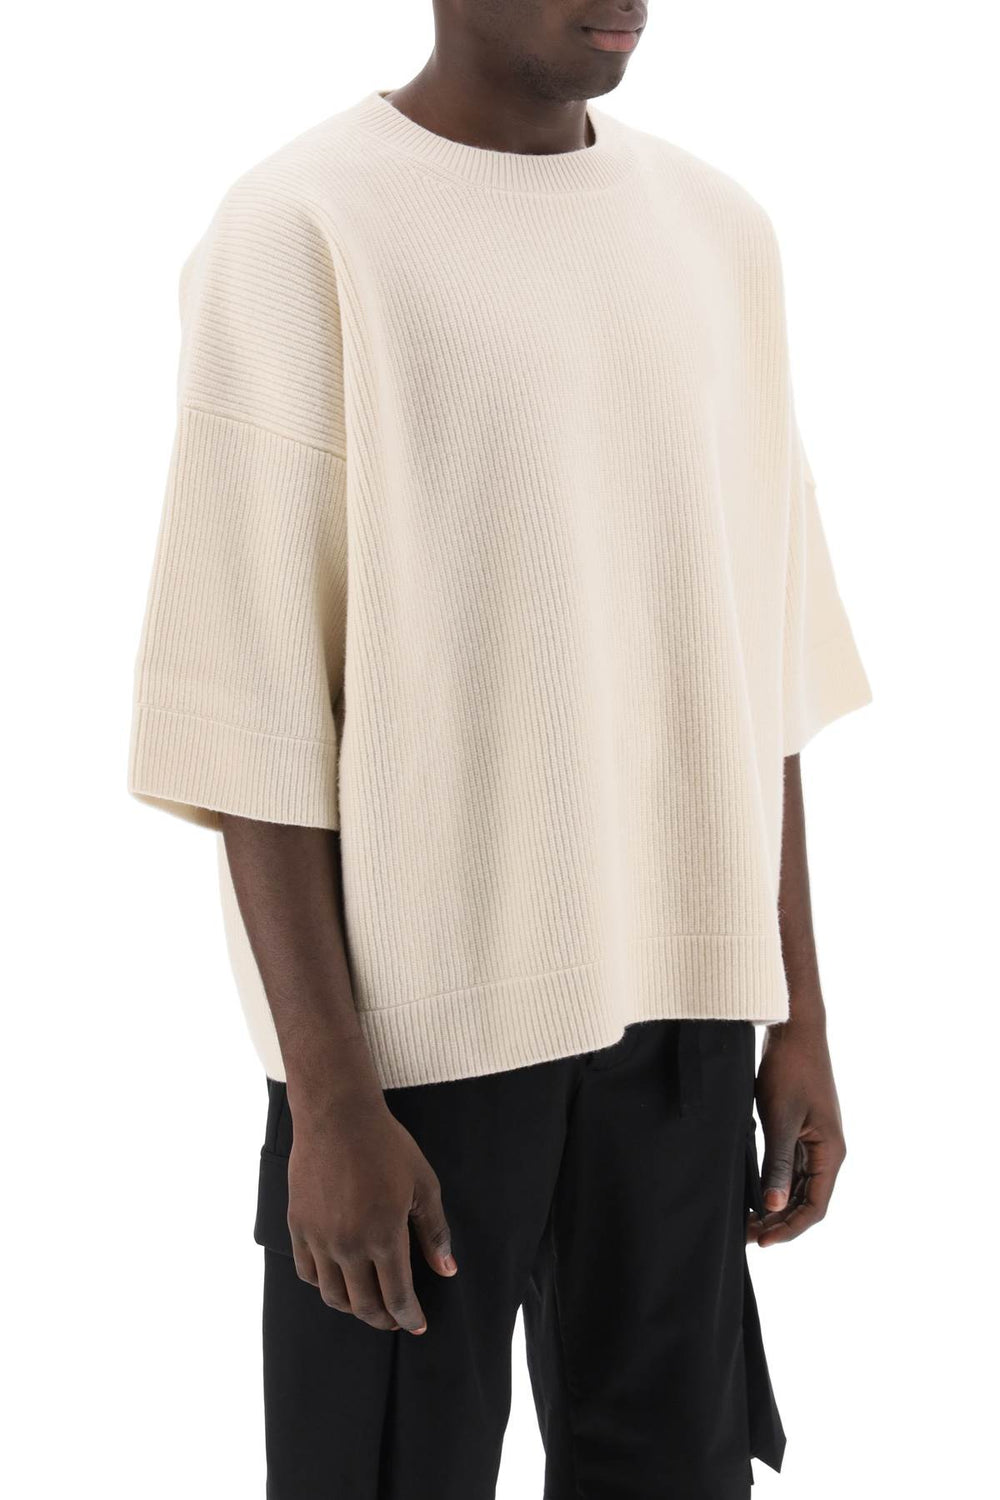 Moncler x roc nation by jay-z short-sleeved wool sweater-1